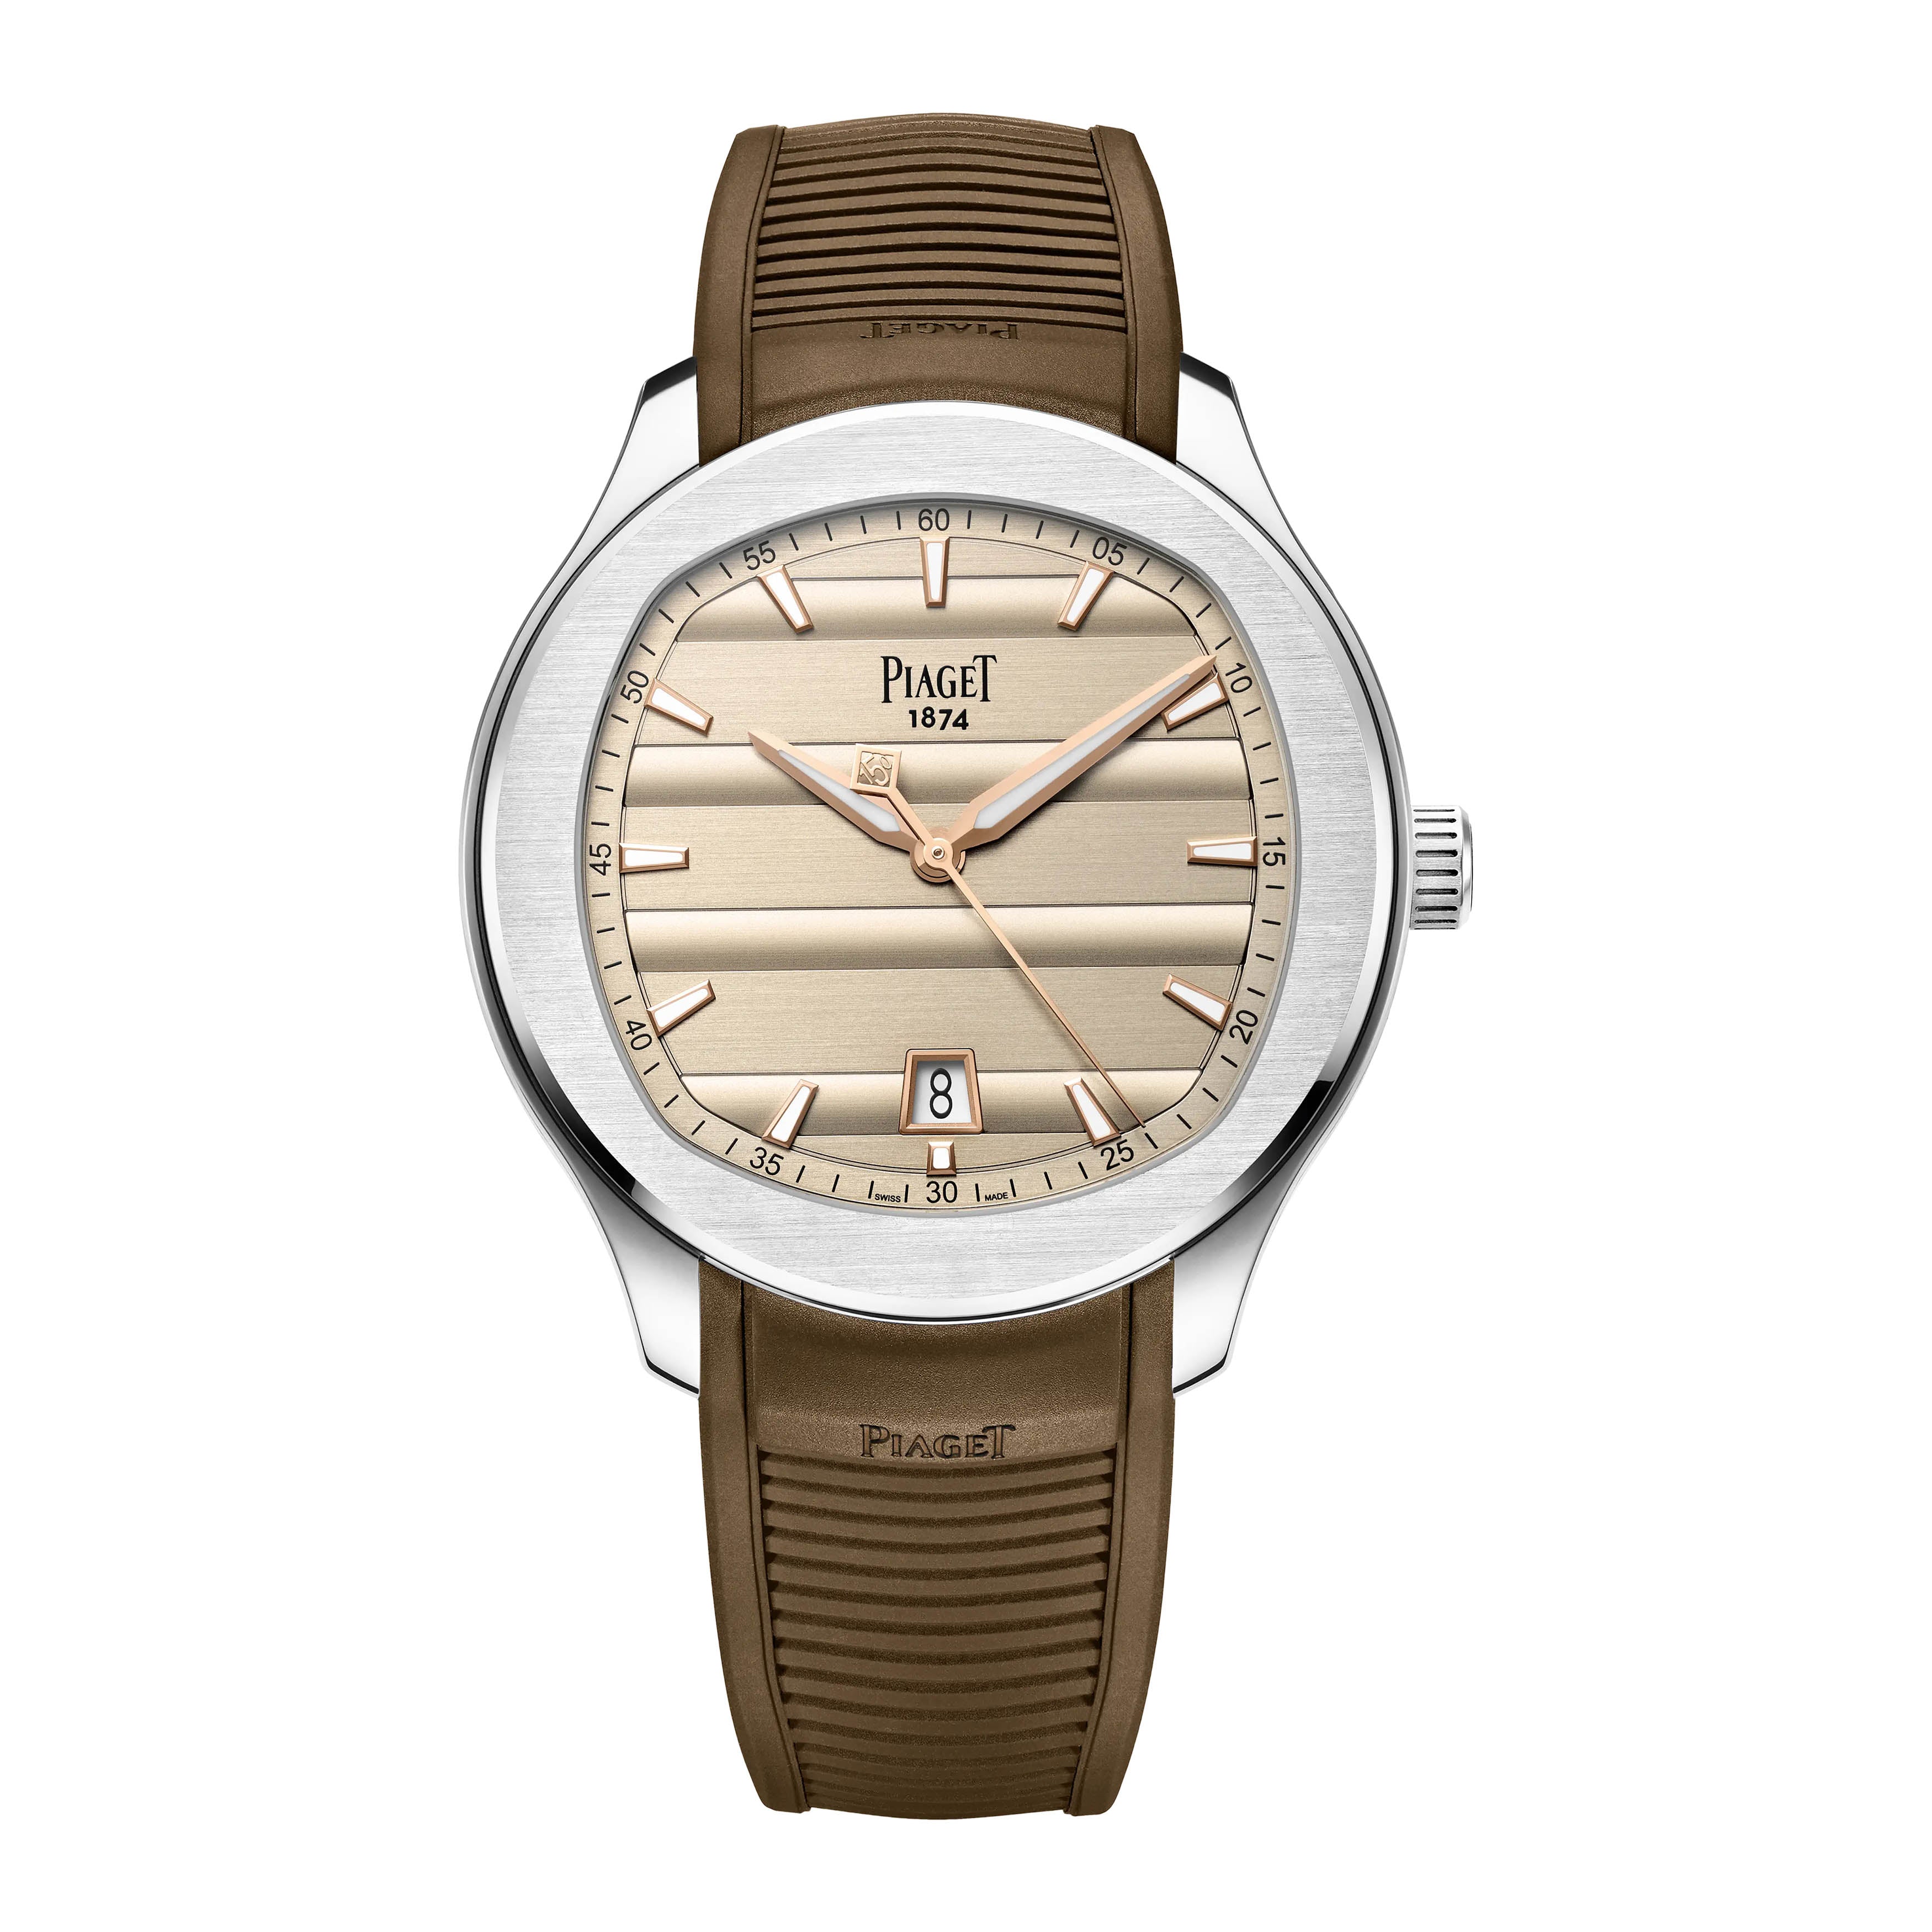 Piaget Polo Date 150th Anniversary Watch, 42mm Tan Dial, G0A49023